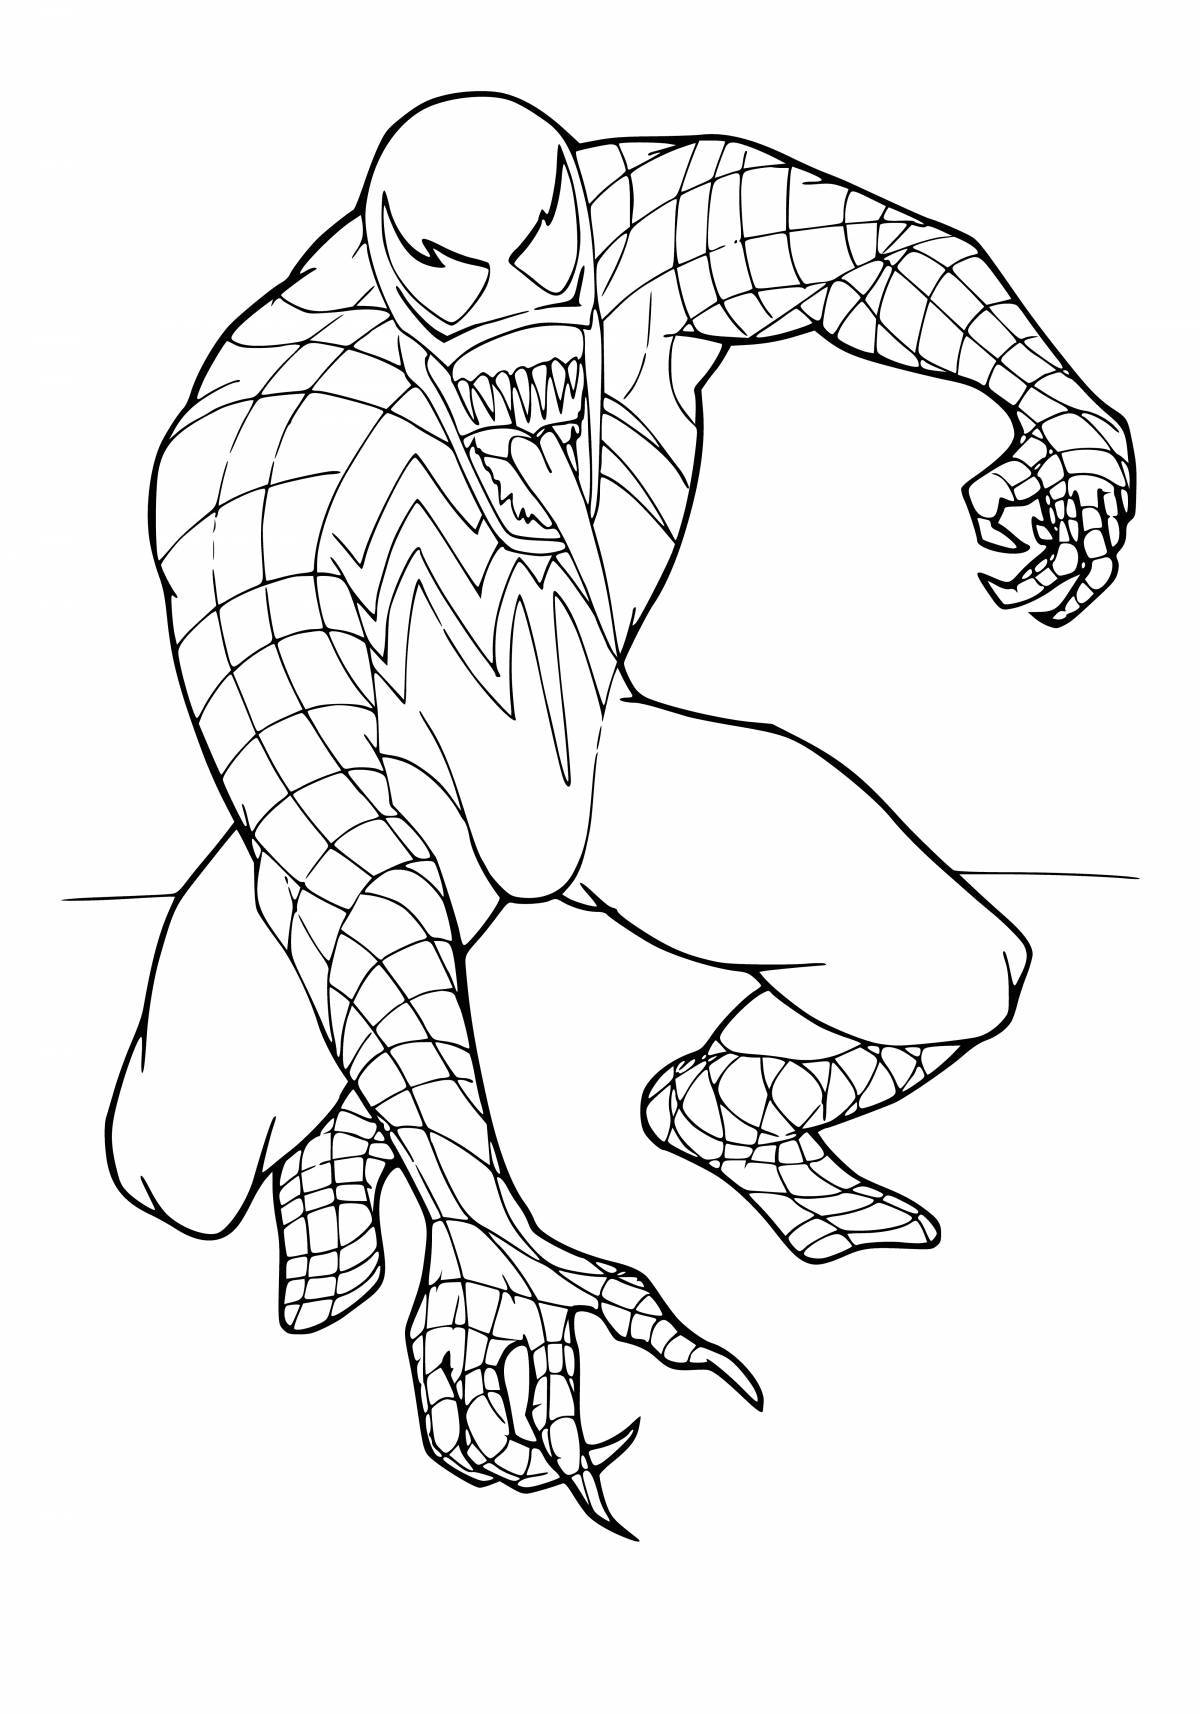 Living spiderman coloring pages for kids